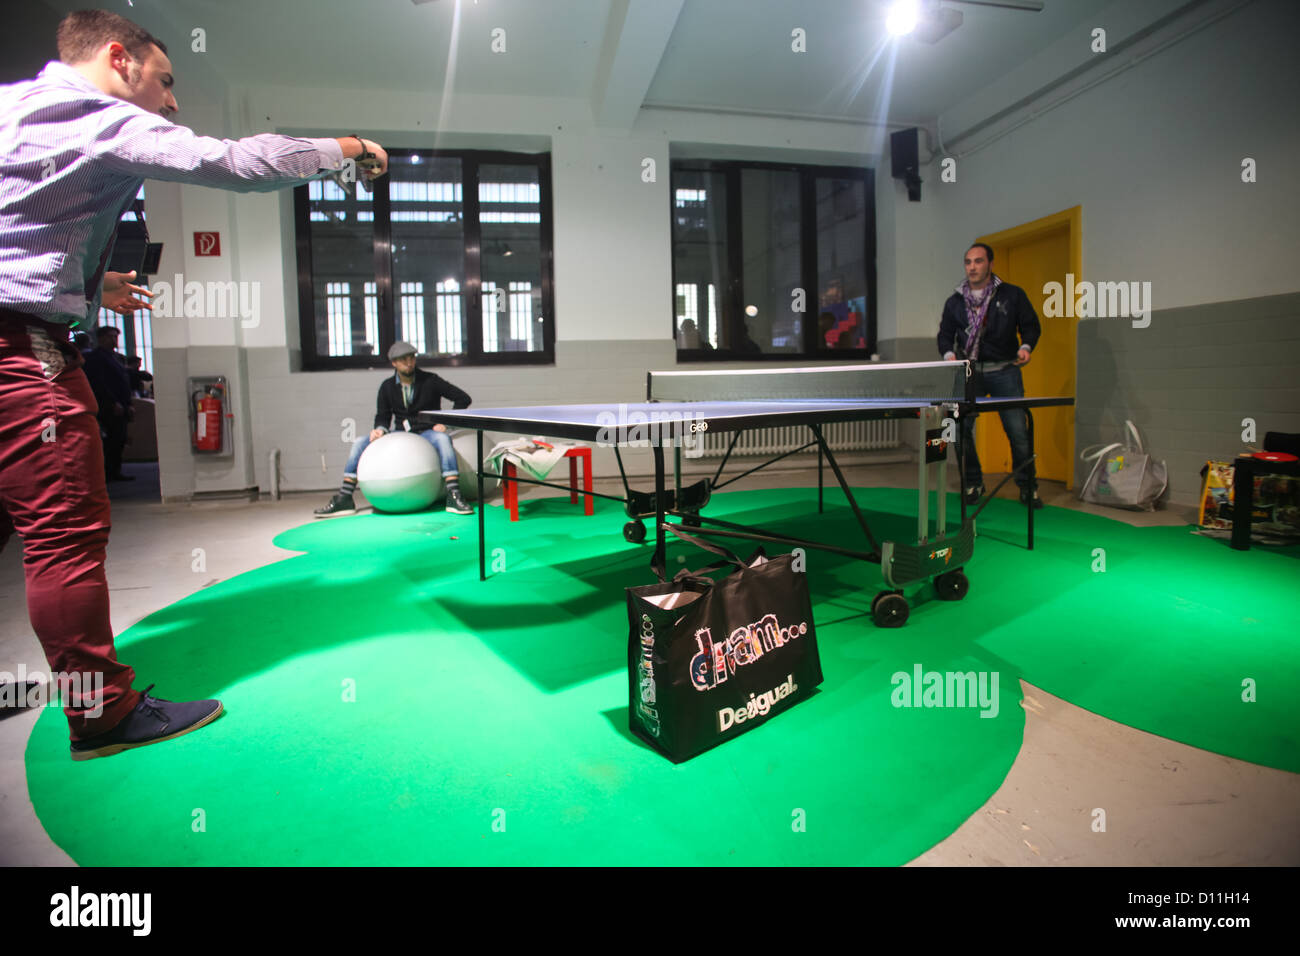 BERLIN - JANUARY 19: Playground area at Bread & Butter fair on January 19, 2011 in Berlin, Germany. Stock Photo